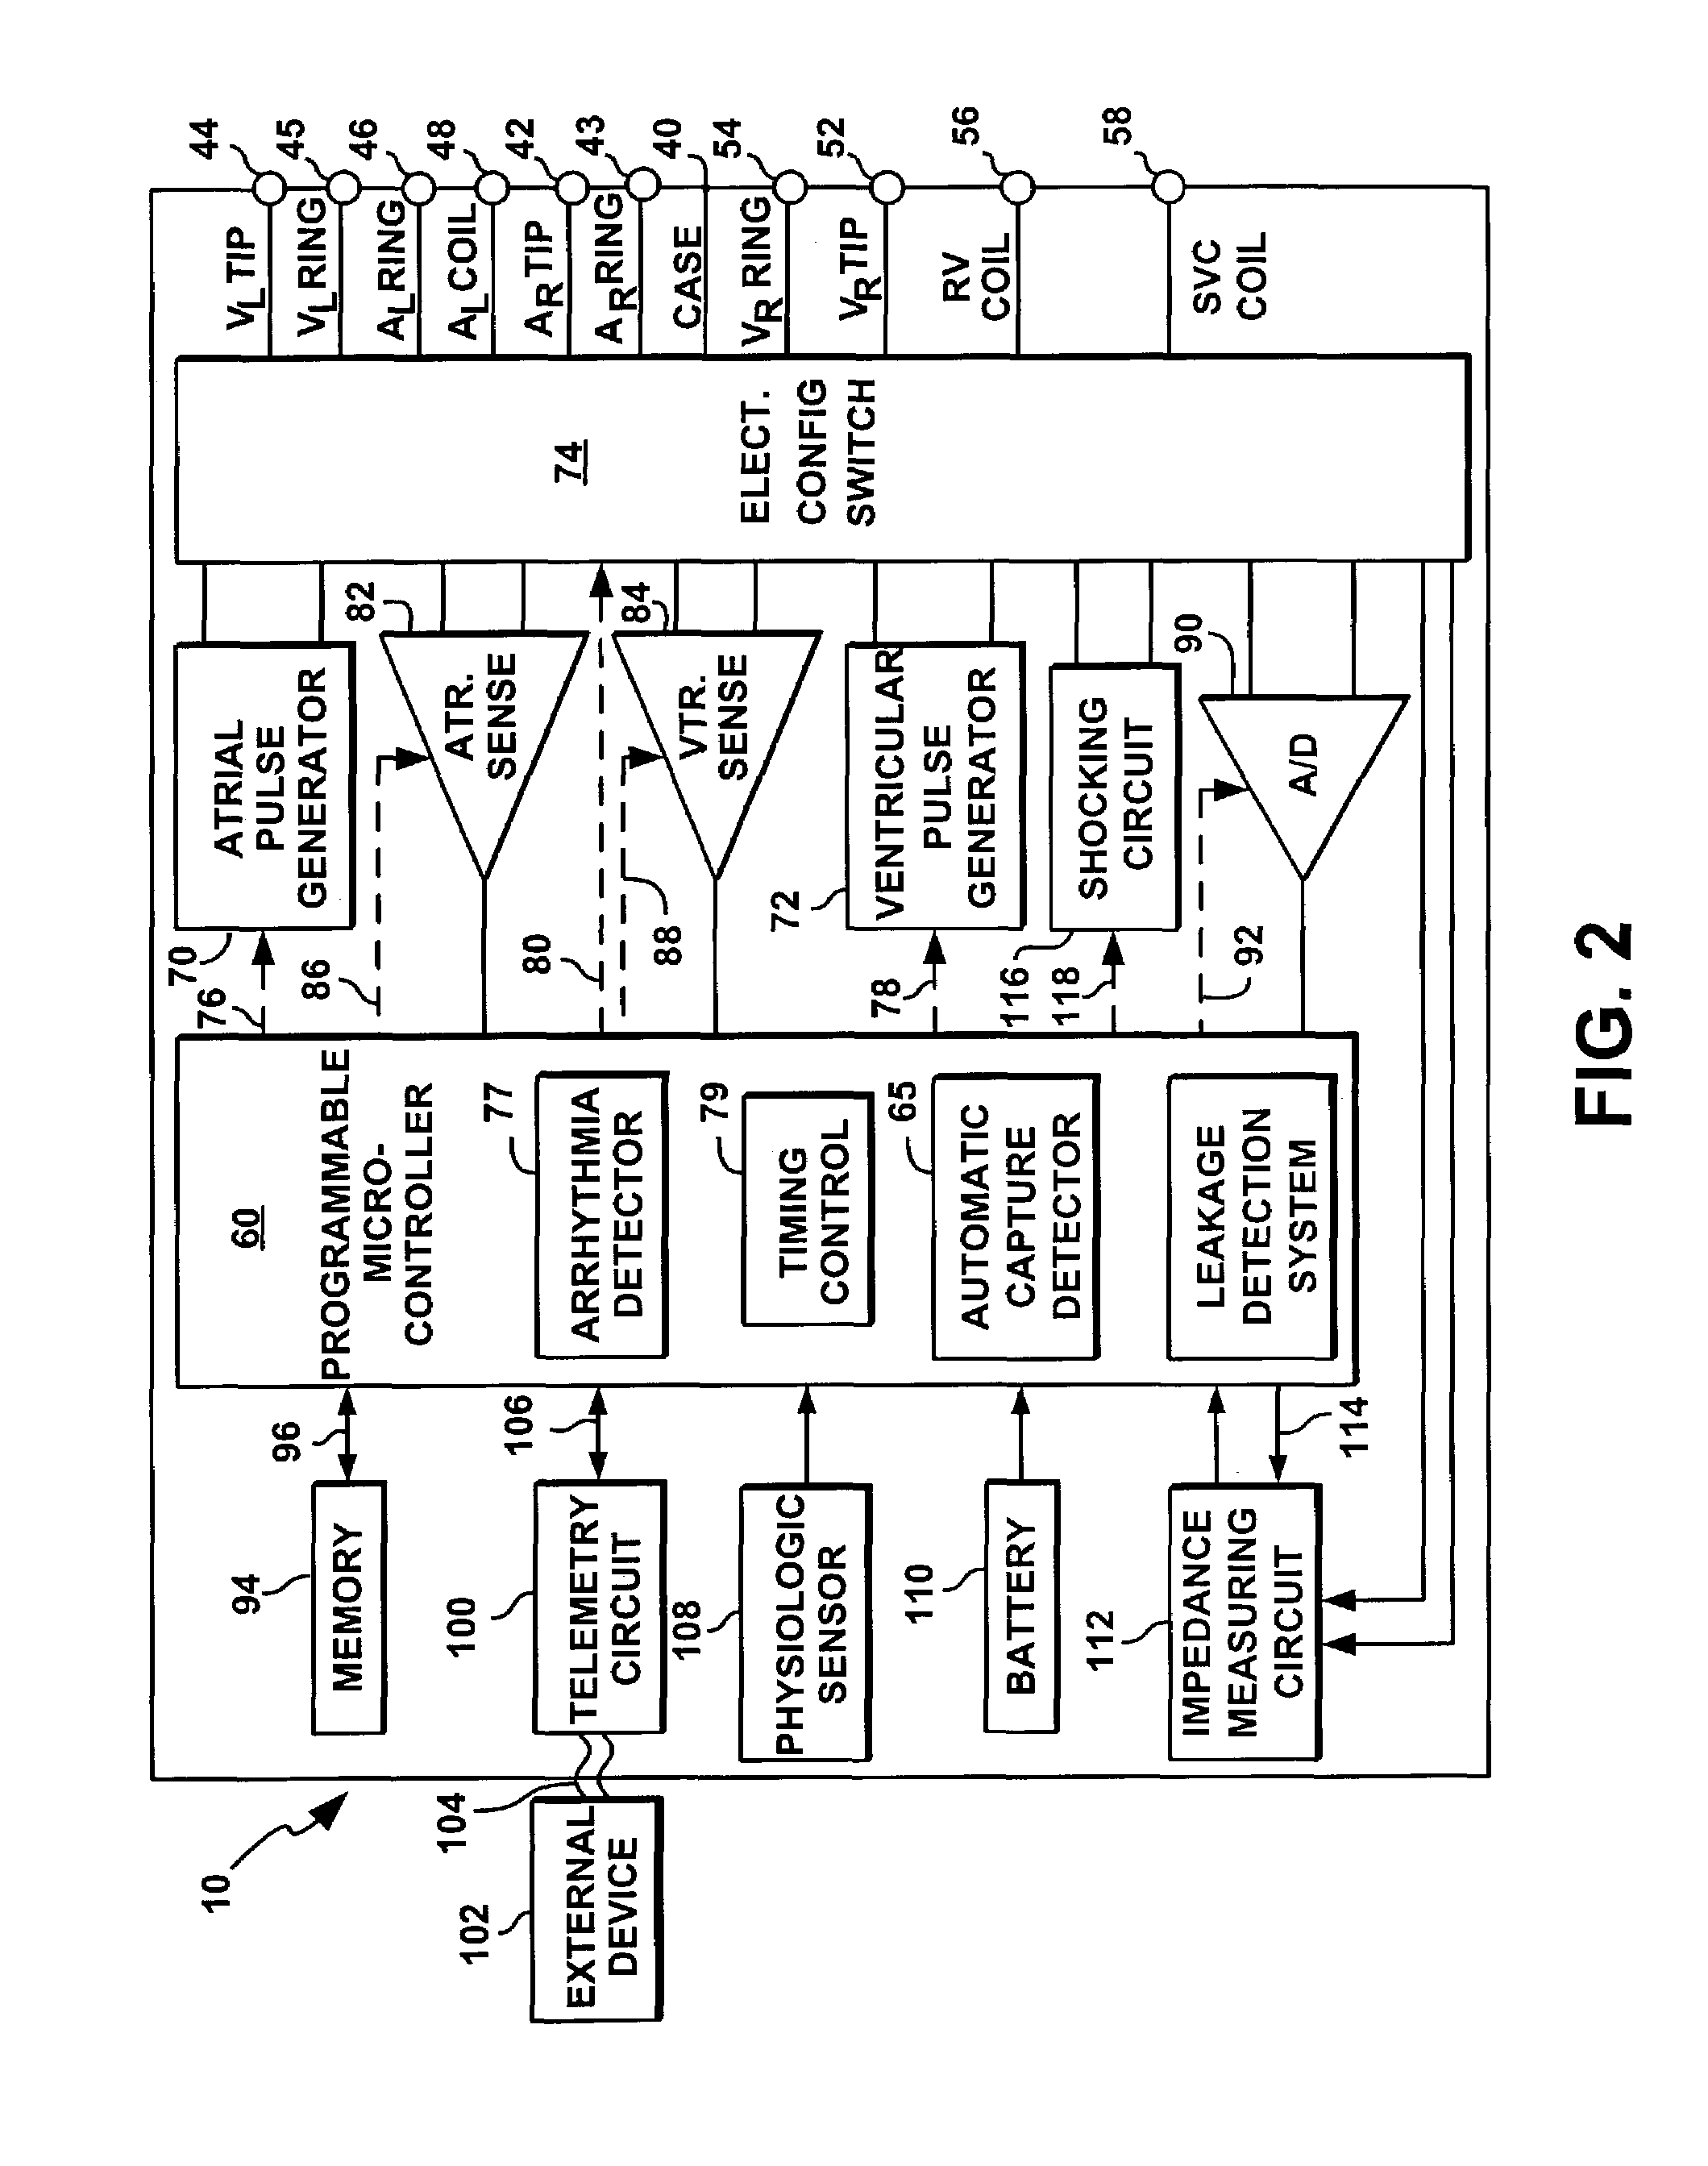 System and method for measuring lead impedance in an implantable stimulation device employing pulse-train waveforms